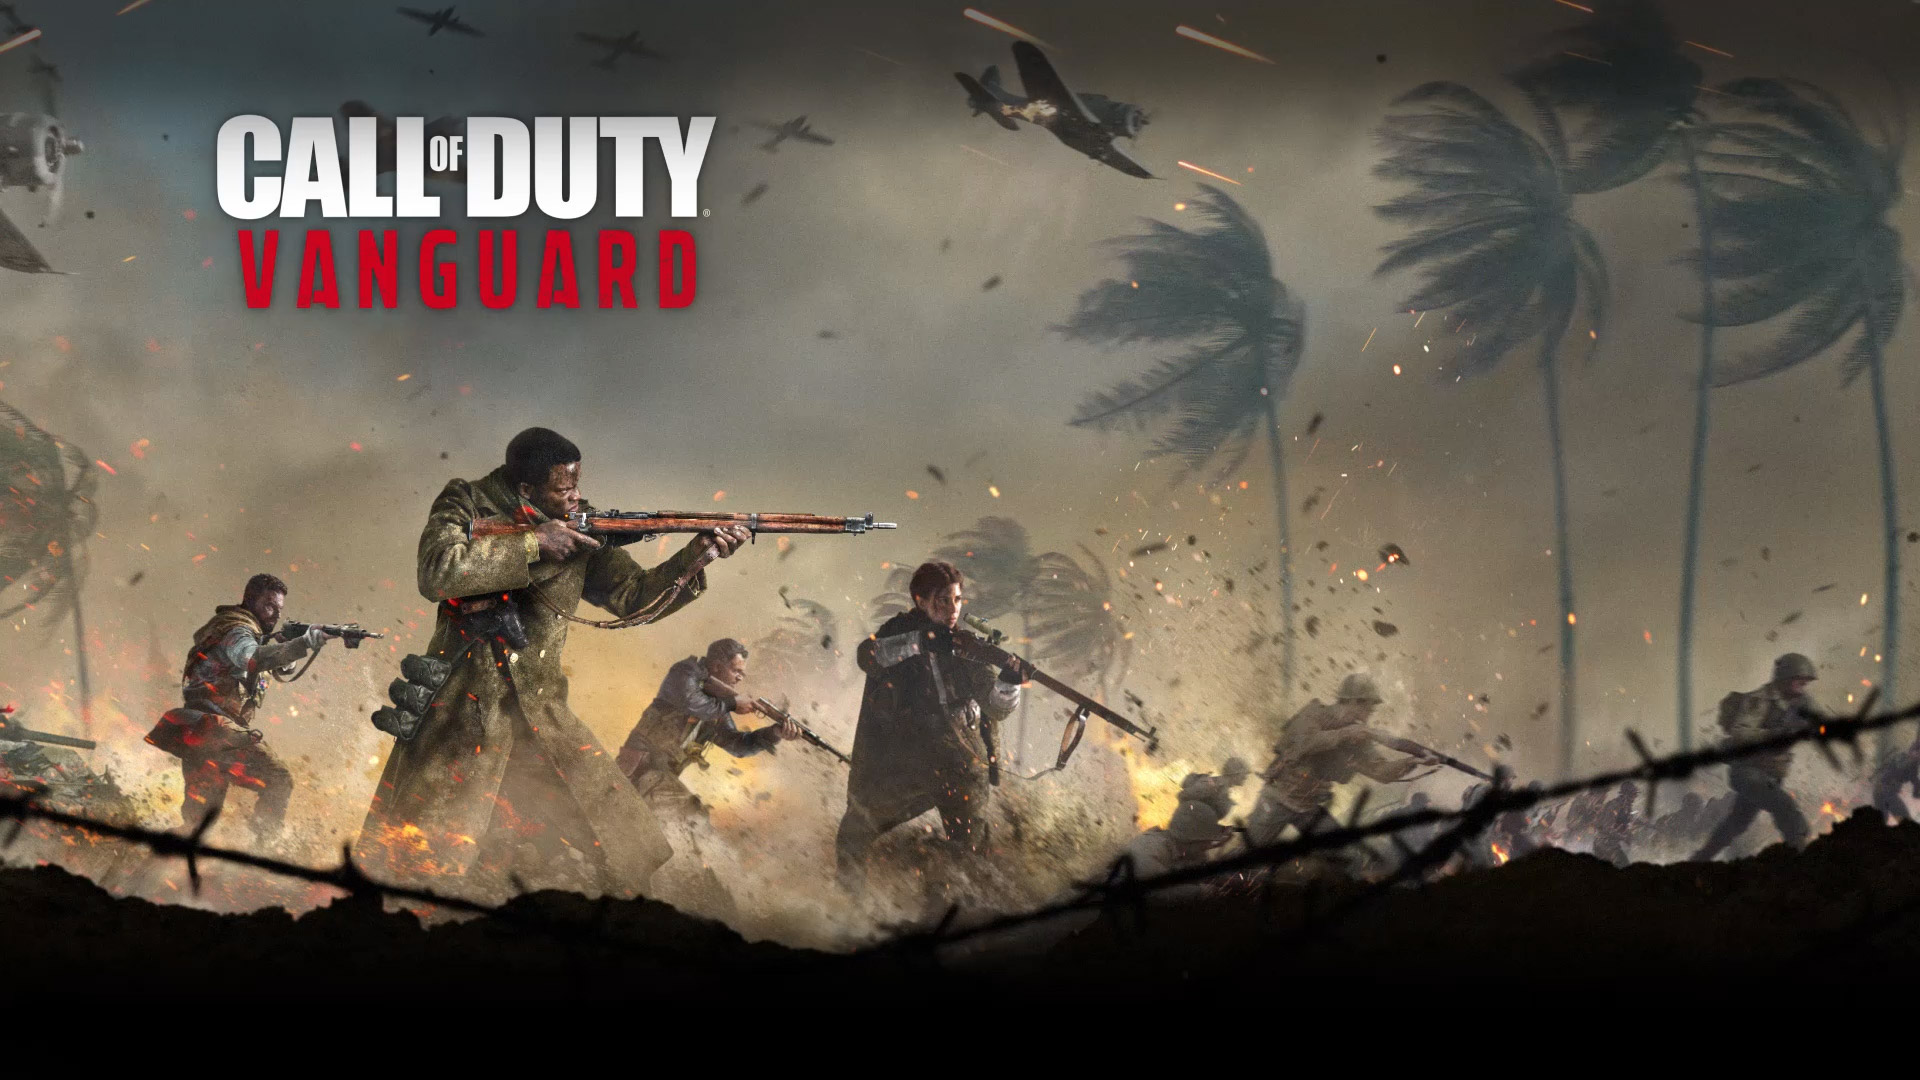 Call of Duty: Vanguard Beta Preview - Rough Edges But An Excellent